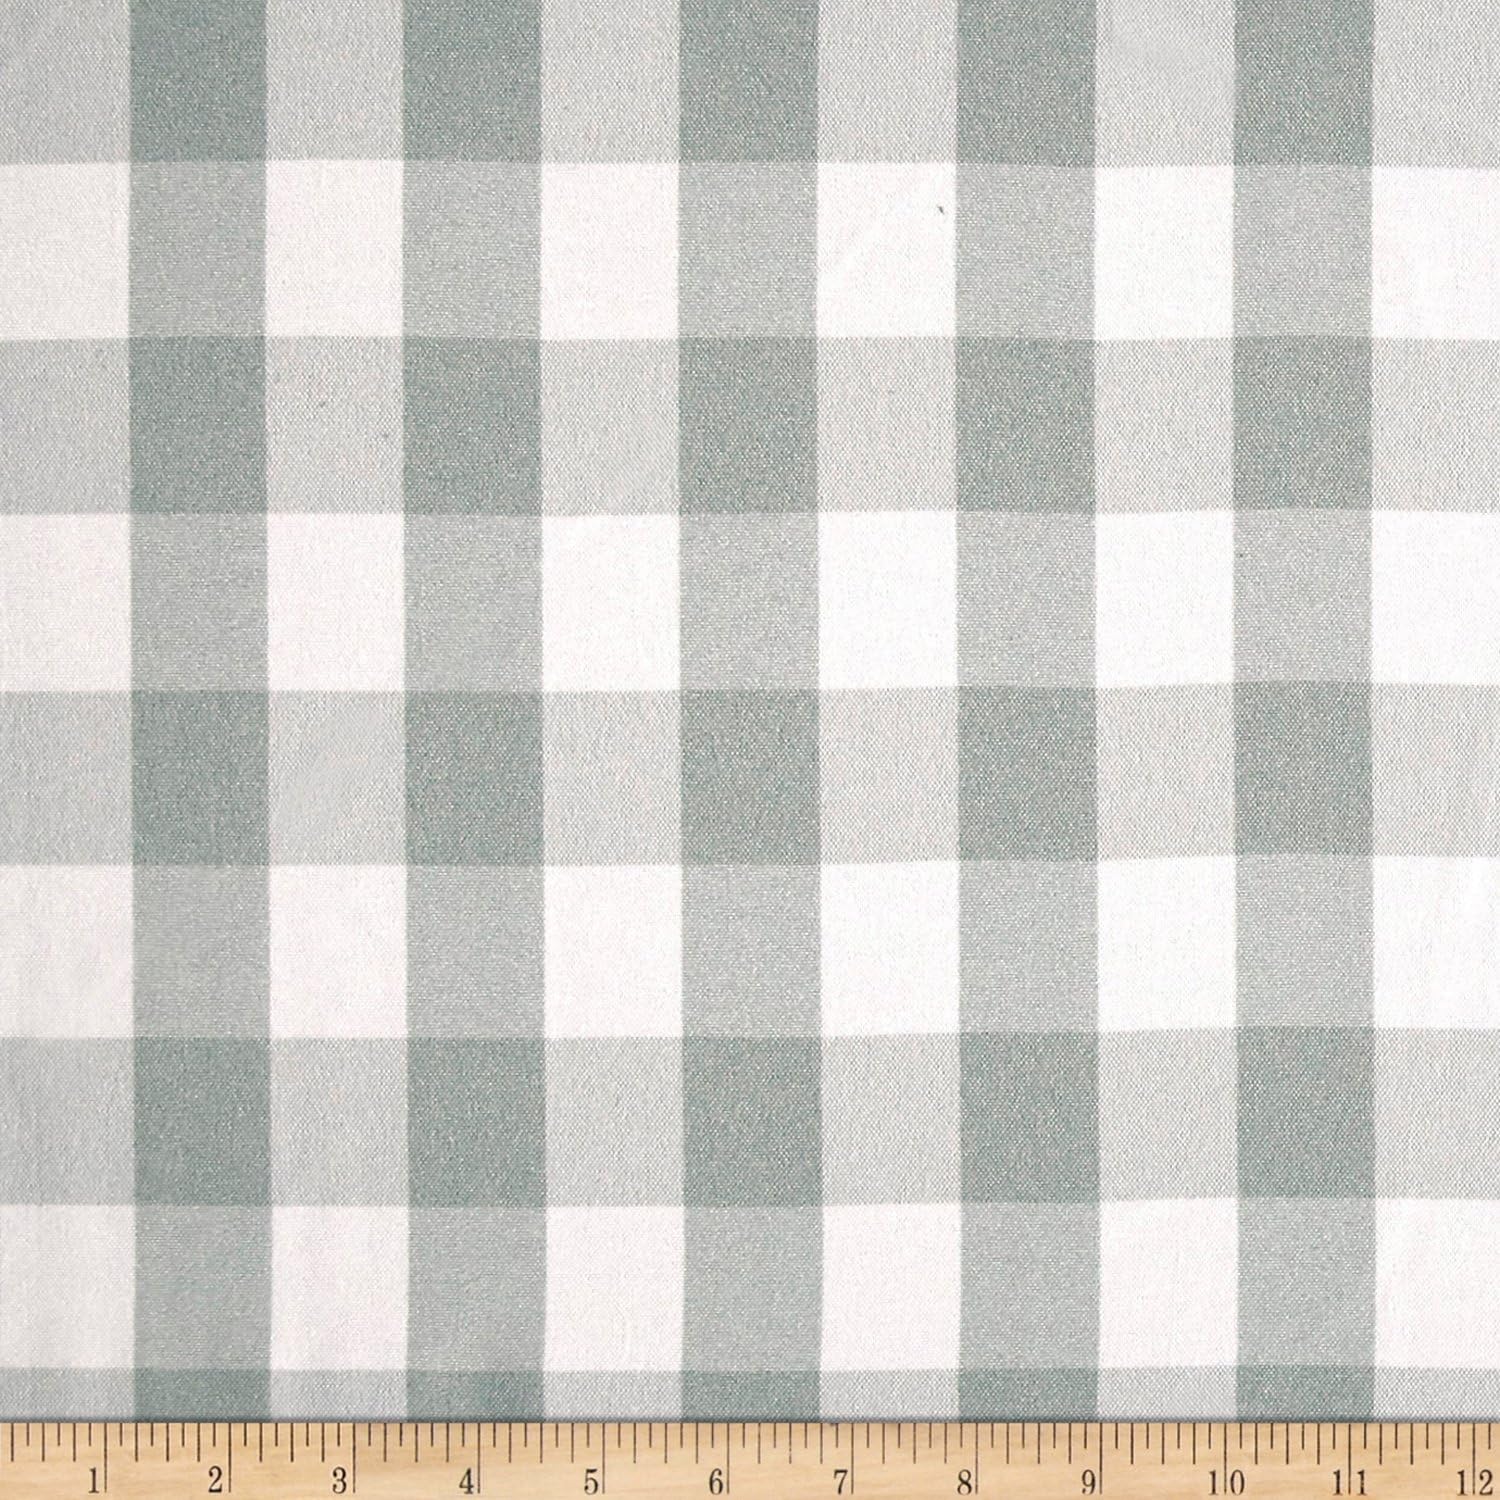 60" Silver Gingham 1" Check Fabric 100 Yard Roll (Free Shipping)